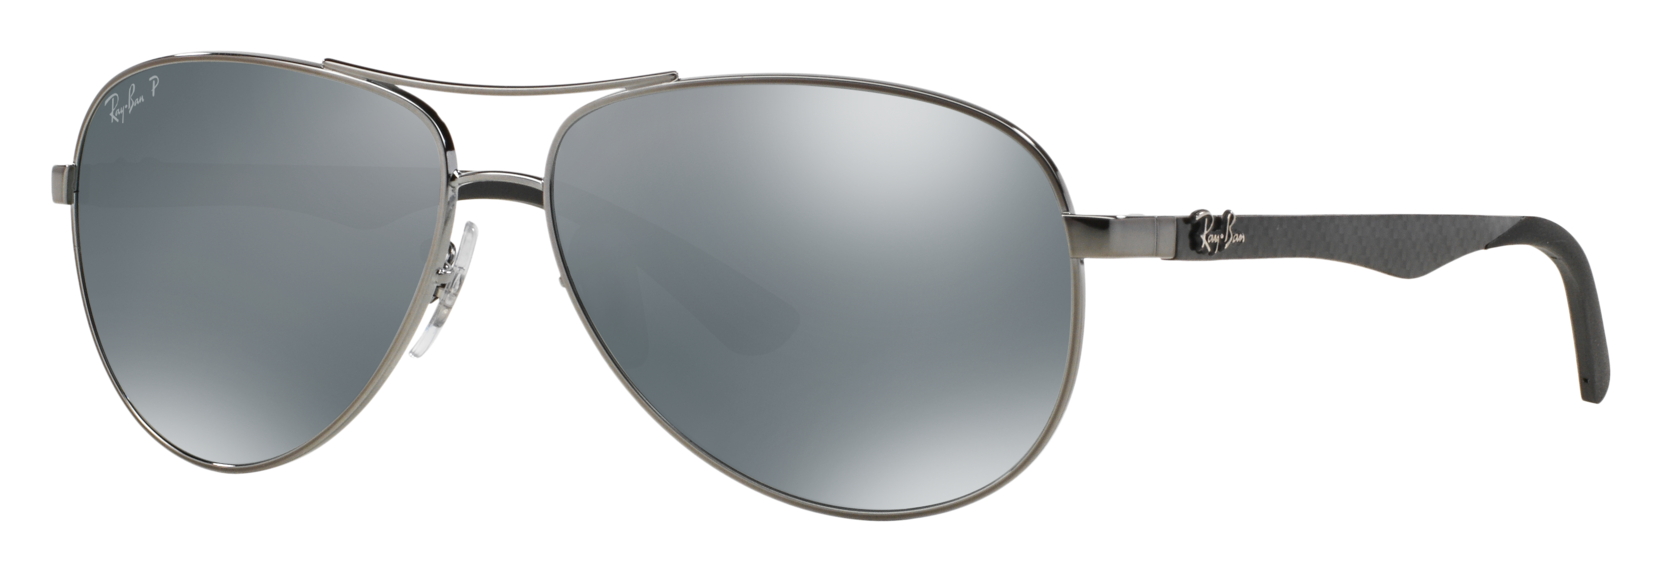 Ray-Ban RB8313 Polarized Sunglasses for Men